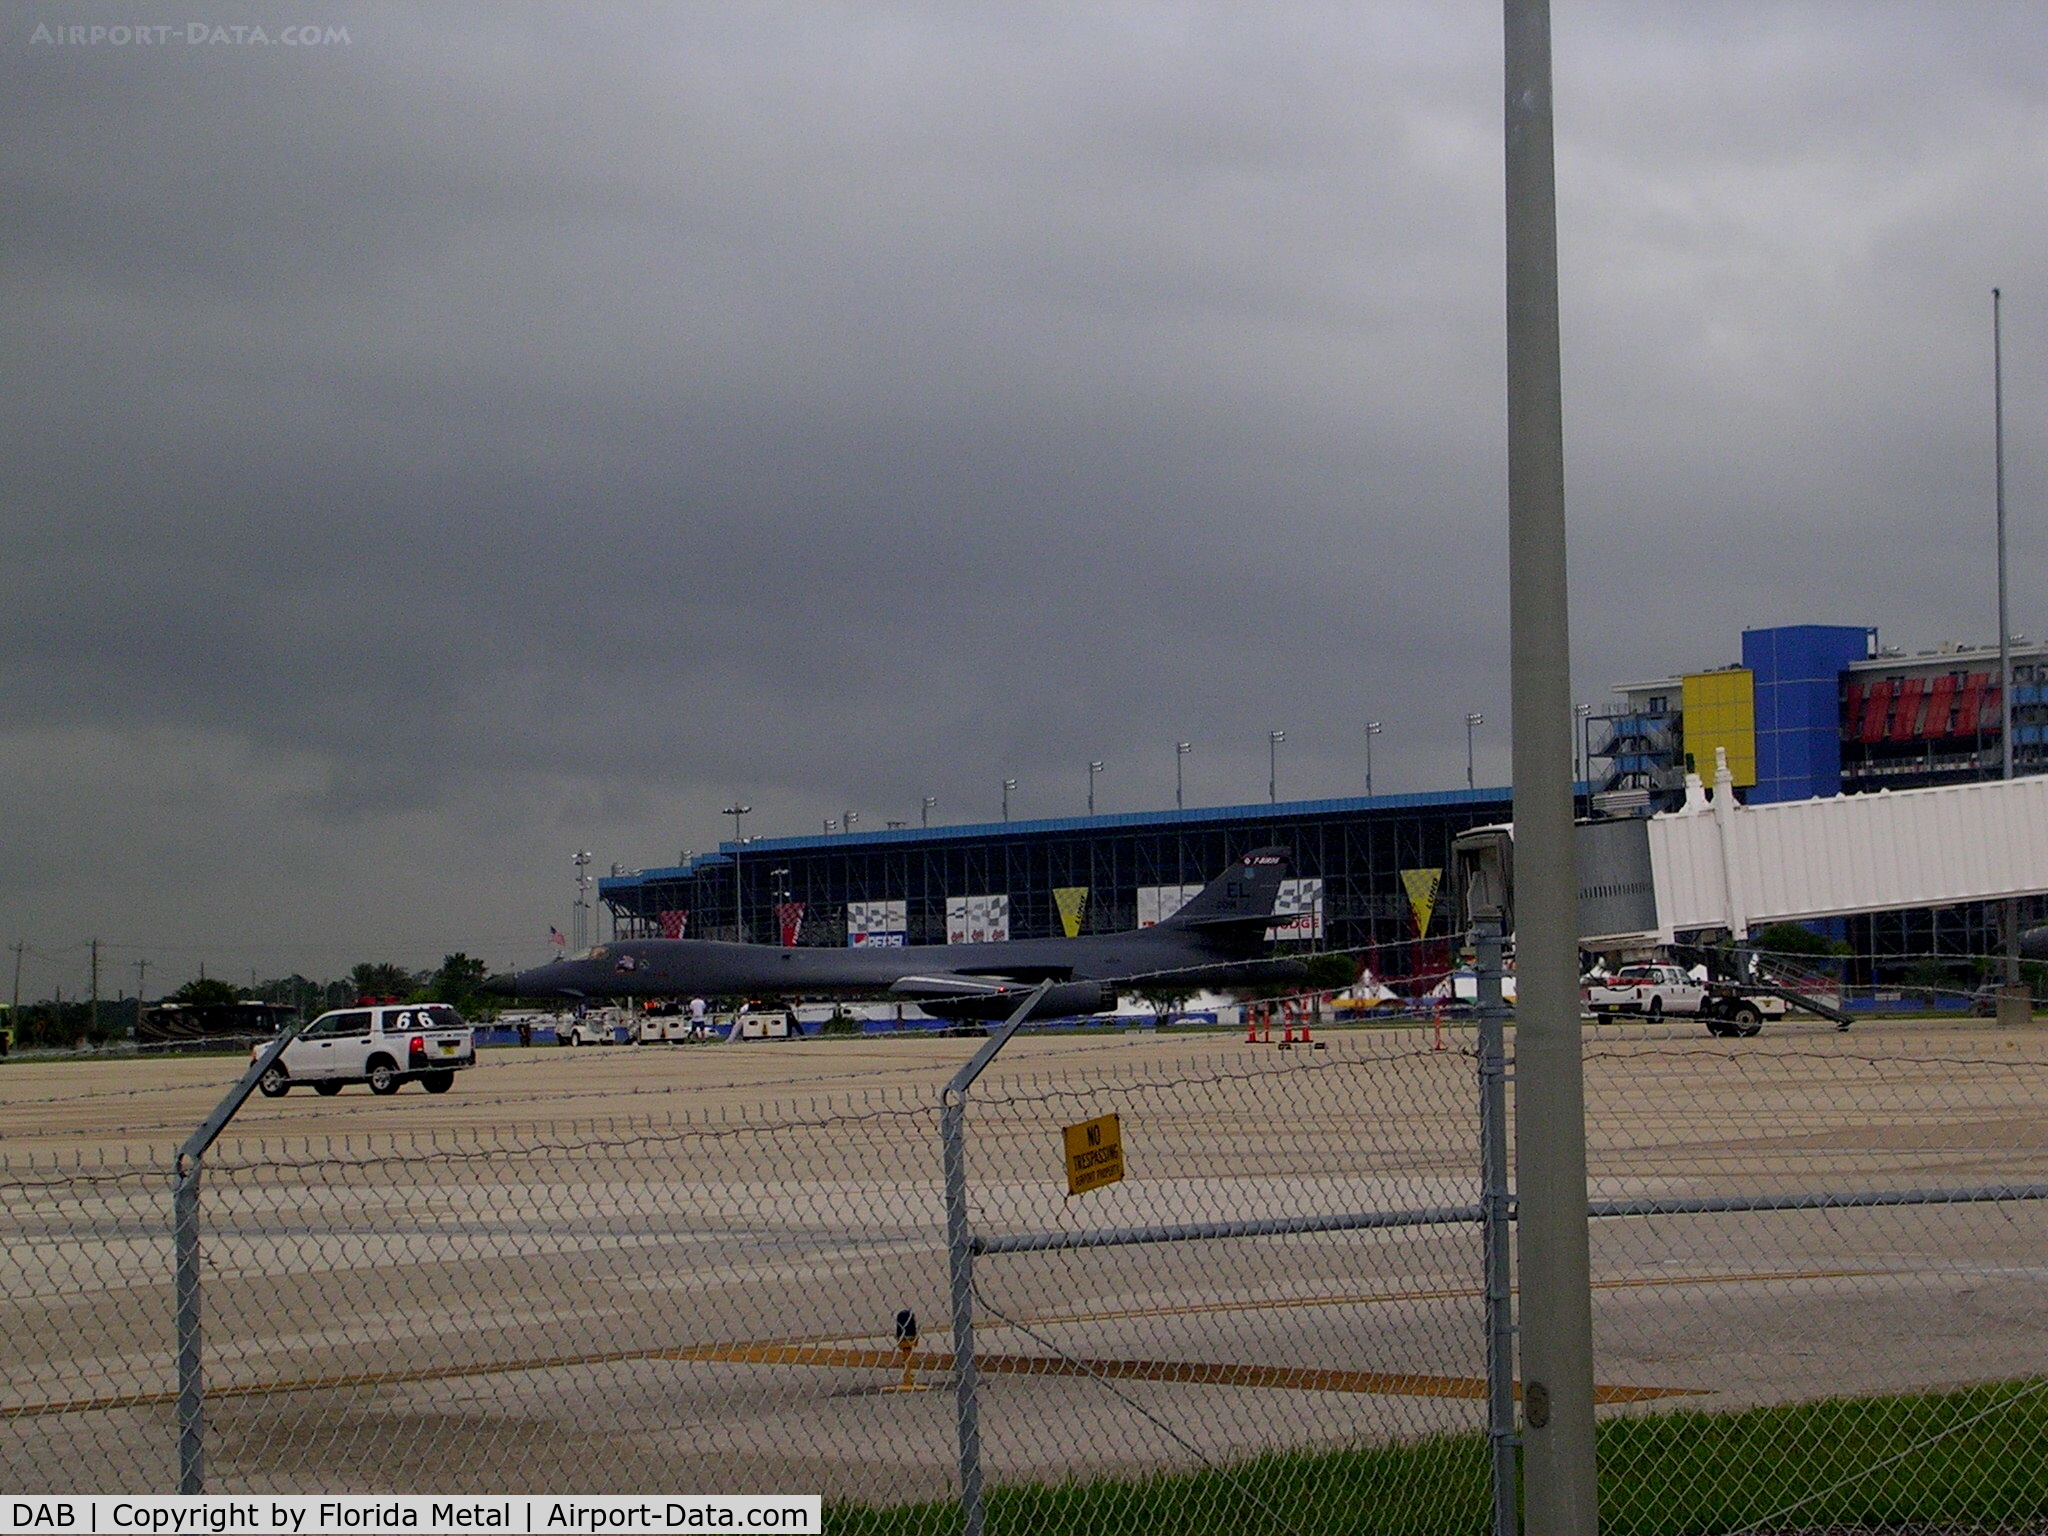 Daytona Beach International Airport (DAB) - B-1 Bomber parked at DAB with approaching storm